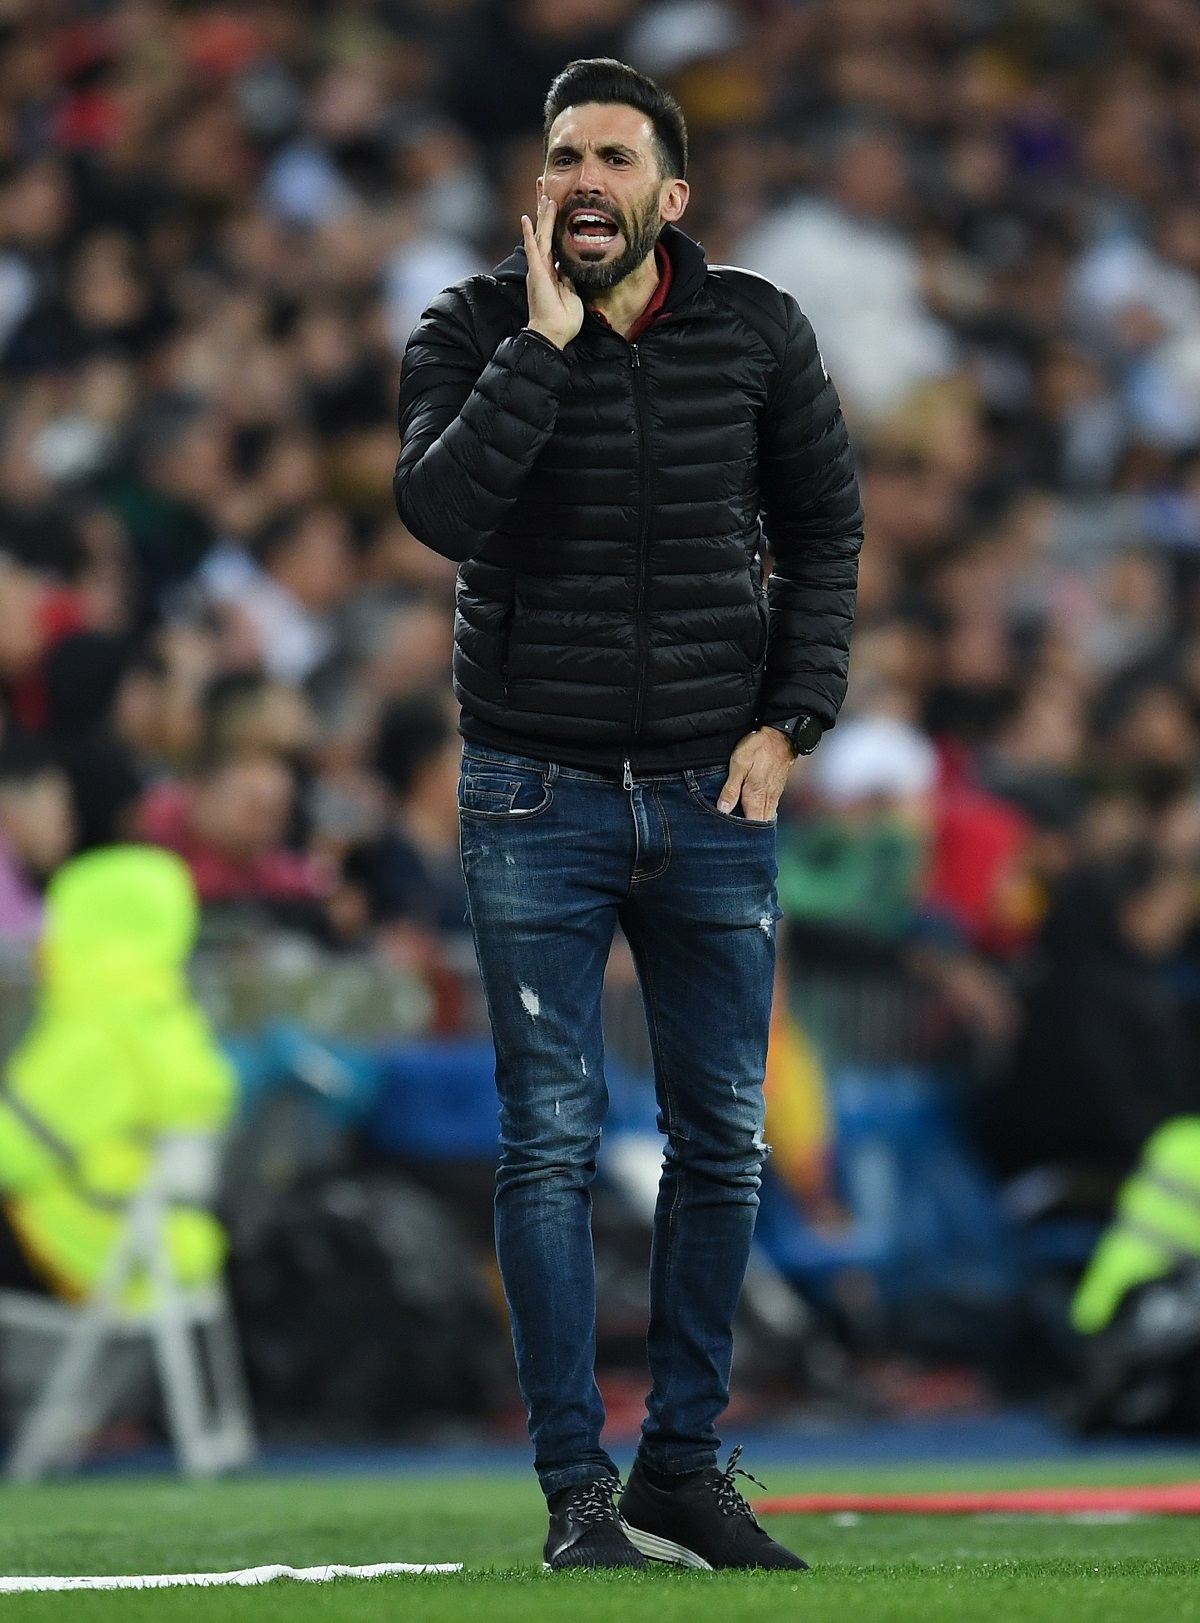 MADRID, SPAIN - MARCH 01: Head coach assistant Eder Sarabia of FC Barcelona gives instructions to his players during the Liga match between Real Madrid CF and FC Barcelona at Estadio Santiago Bernabeu on March 01, 2020 in Madrid, Spain. (Photo by David Ramos/Getty Images)